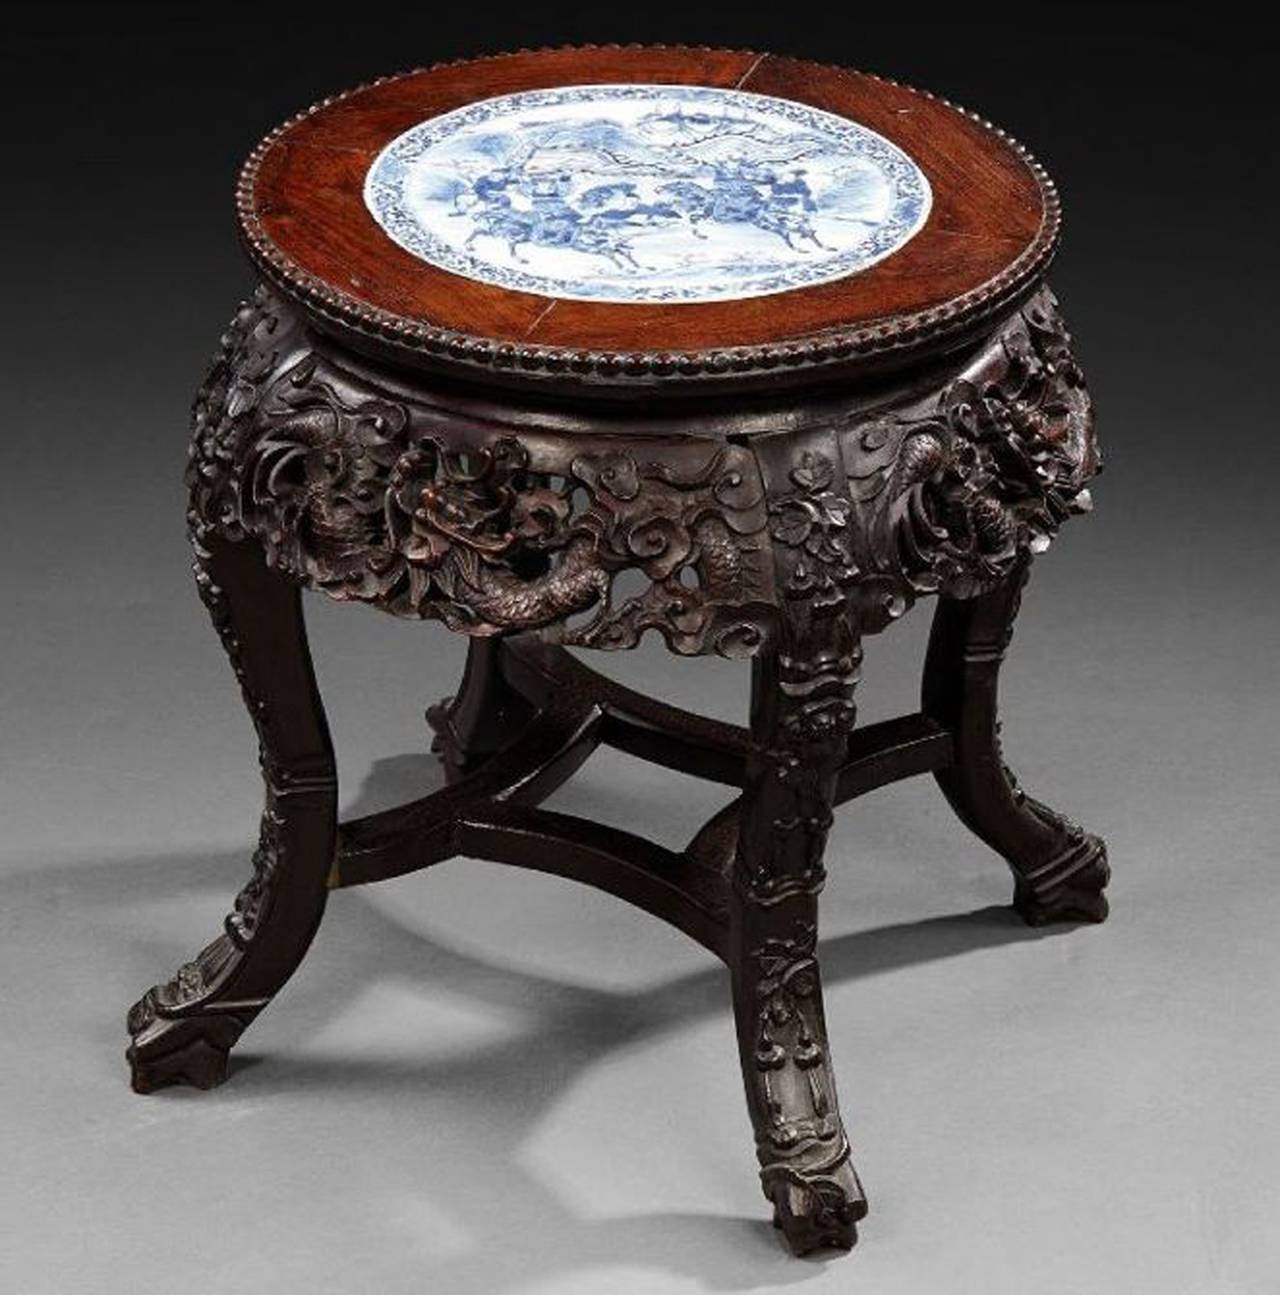 This dark wood stool is decorated with sculptures of dragons and plants.
It can be used as an occasional table.
 A blue and white porcelain plaque with a war subject is inlaid on the top of the table. 

Measures: High 45cm., diameter